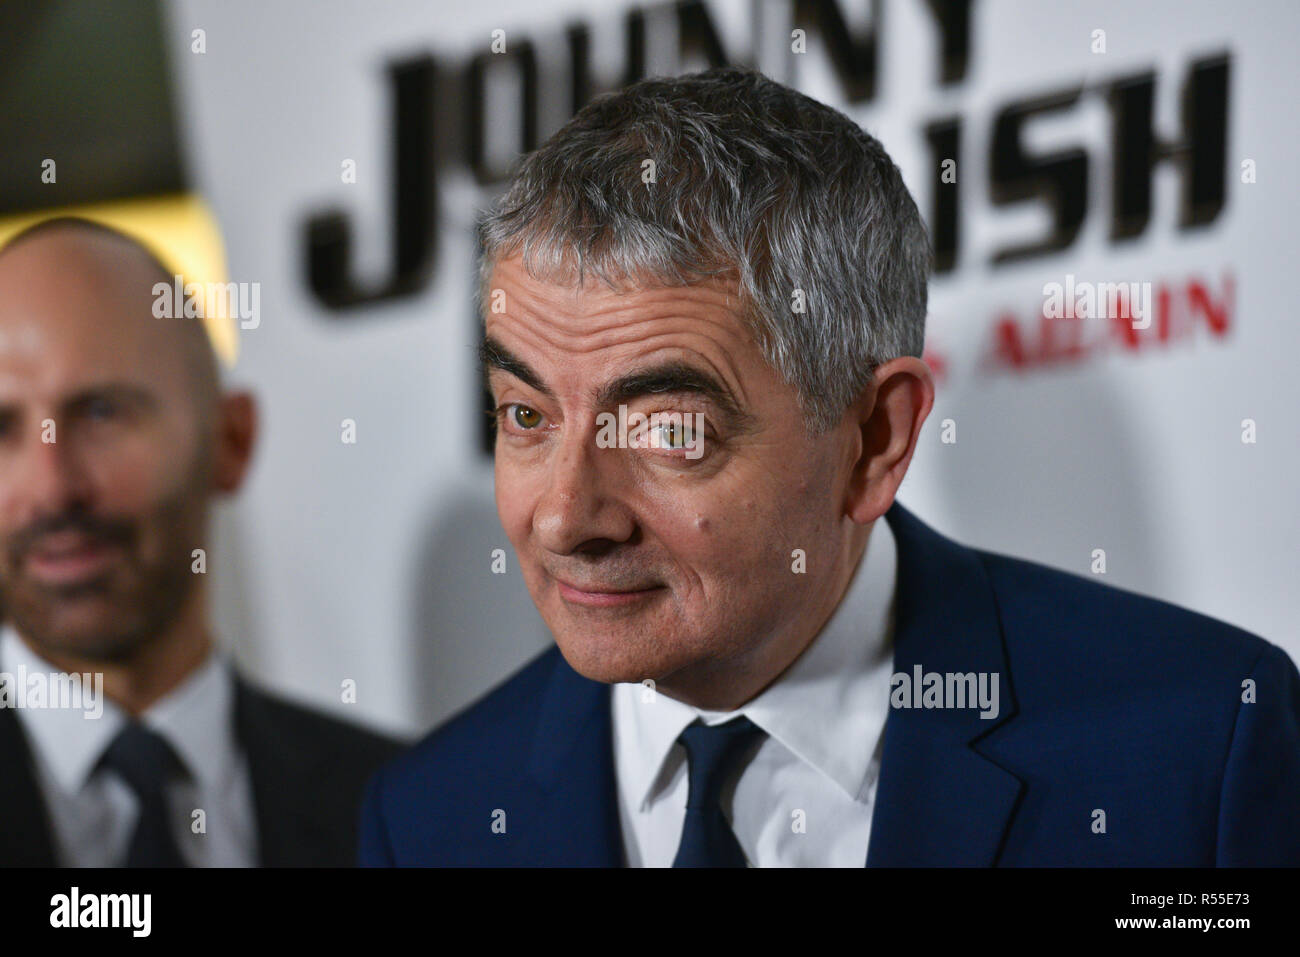 Rowan Atkinson arrives for the special screening of 'Johnny English Strikes Again' at AMC Lincoln Square in New York on October 23, 2018. Stock Photo